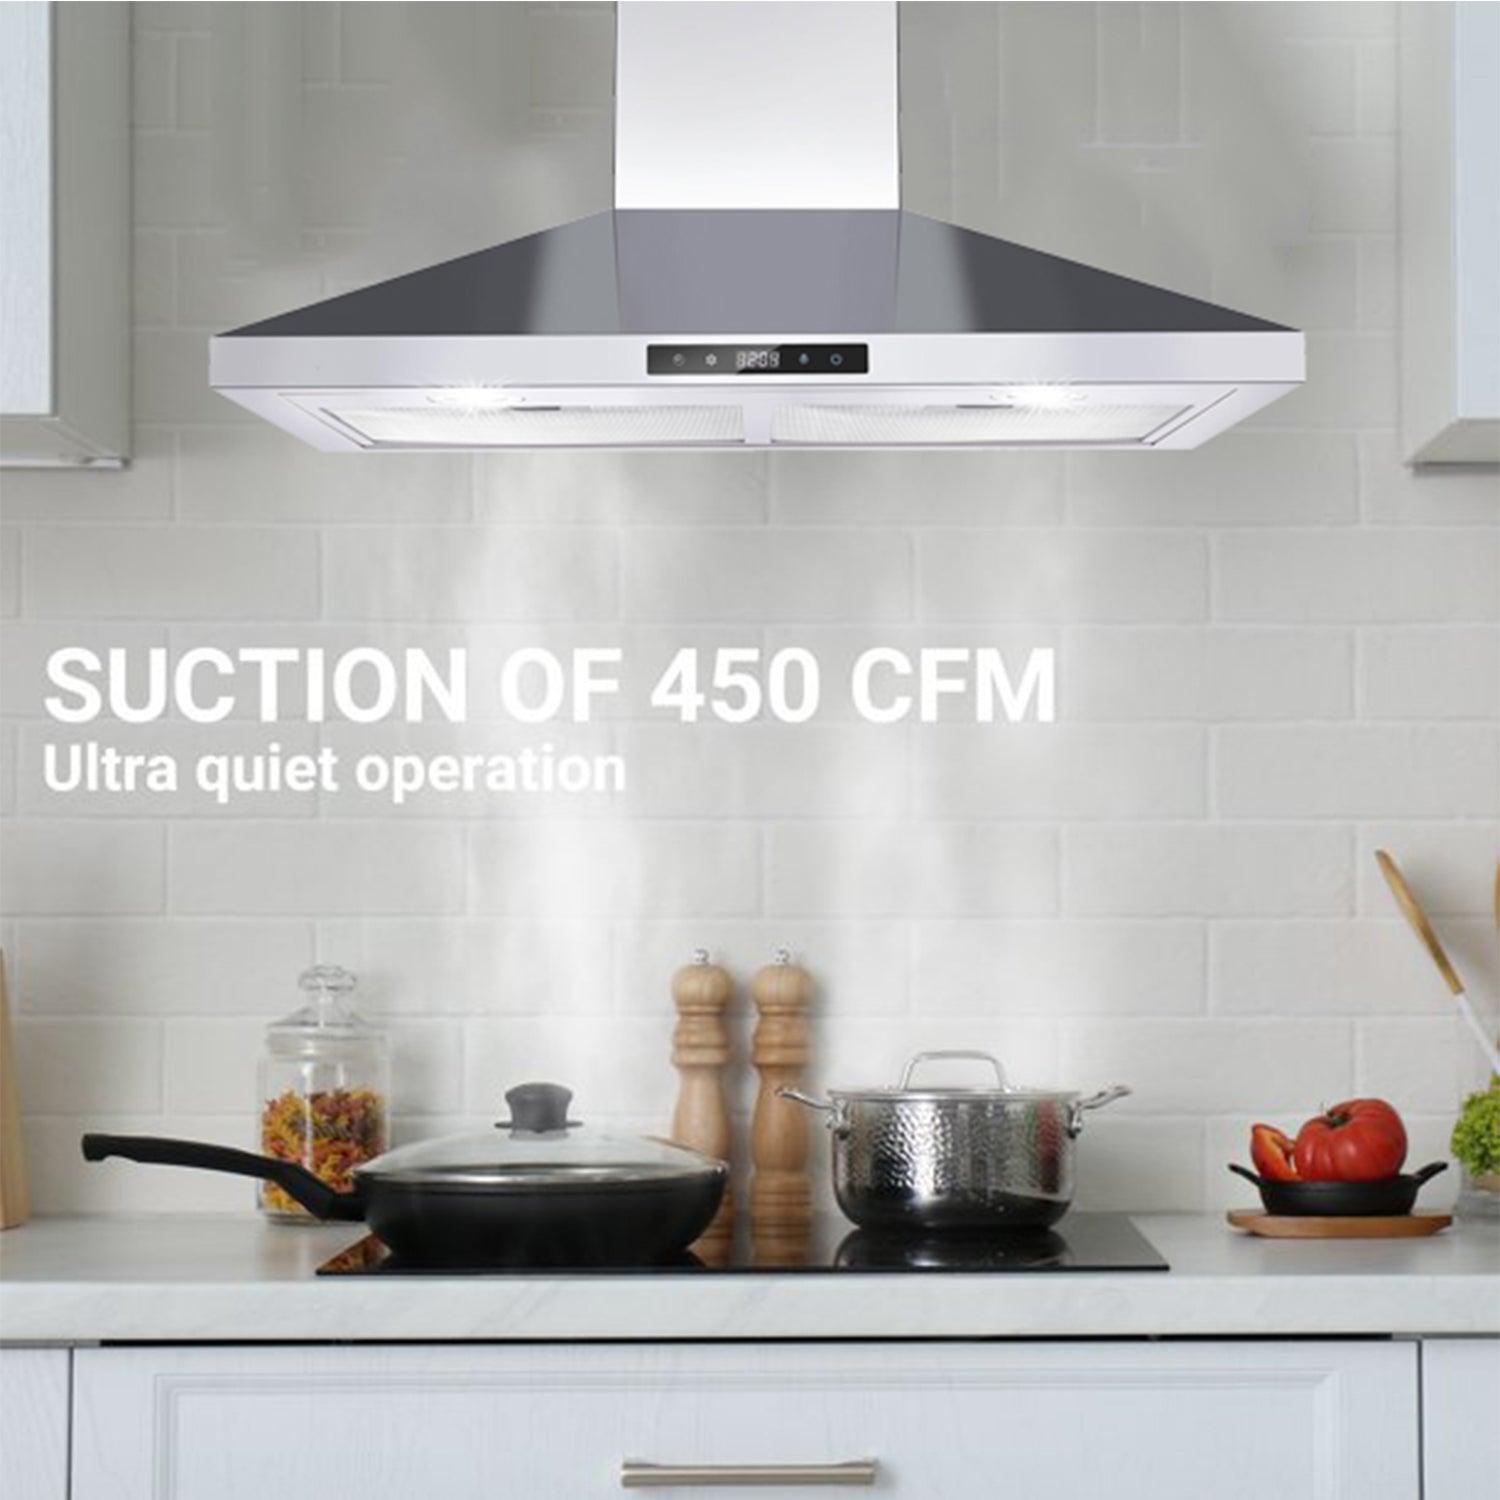 Iseasy 30 500 CFM Convertible Wall Mount Range Hood with Charcoal Filters and Vent Hose 18594